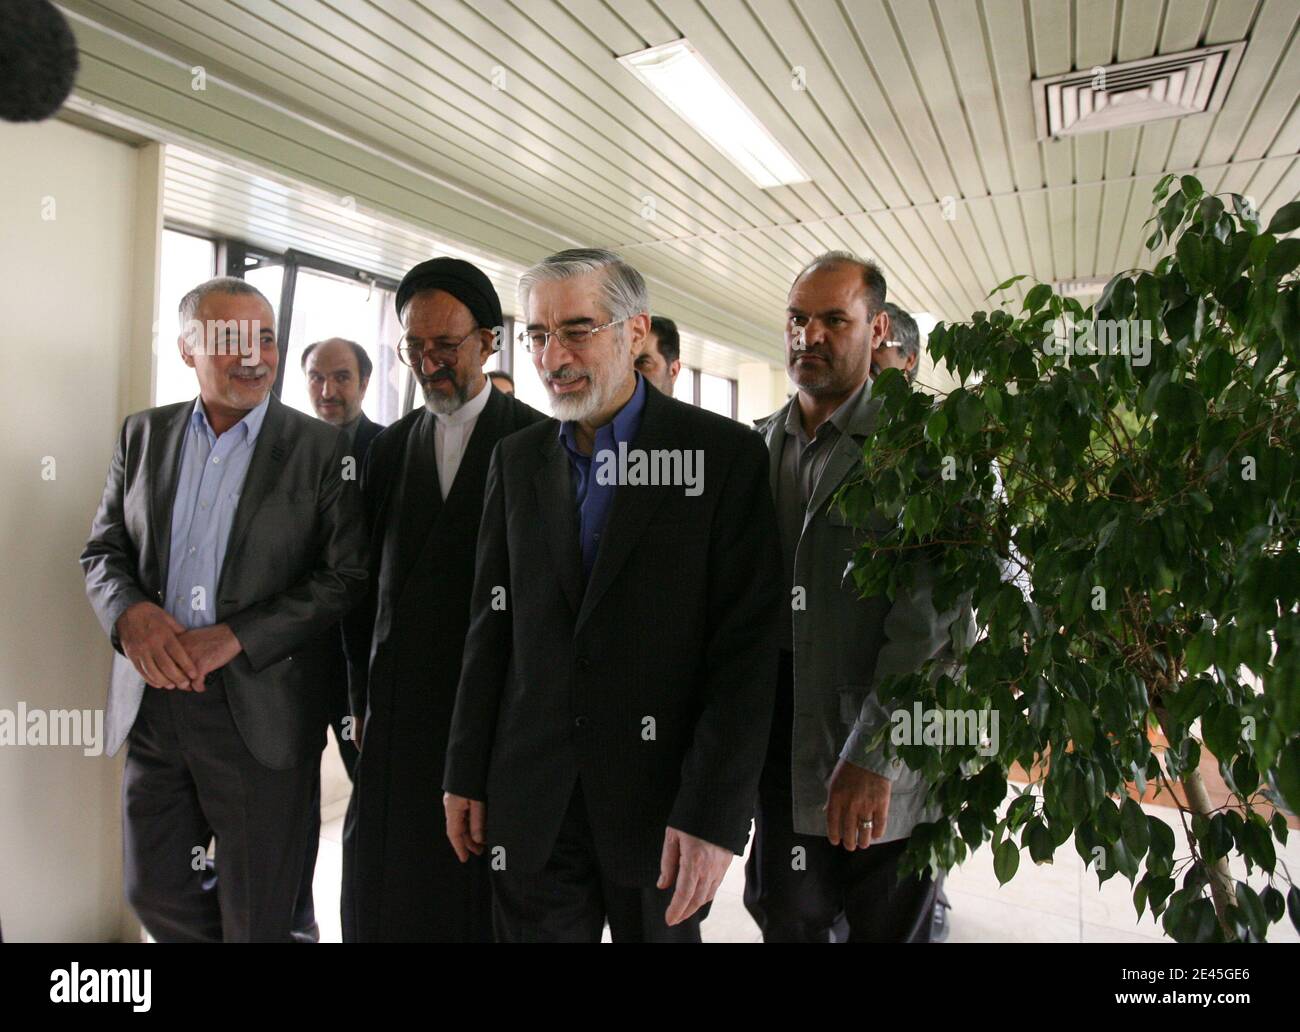 Iranian reformist presidential candidate Mir Hossein Mousavi (2nd R) arrives for a press conference in Tehran, Iran on May 29, 2009. Mousavi, a former premier, said that he is prepared to hold talks with the international P5-plus-1 group over Iran's nuclear drive if elected, but he added that Tehran would continue its nuclear programme. Photo by Farzaneh Khademian/ABACAPRESS.COM Stock Photo